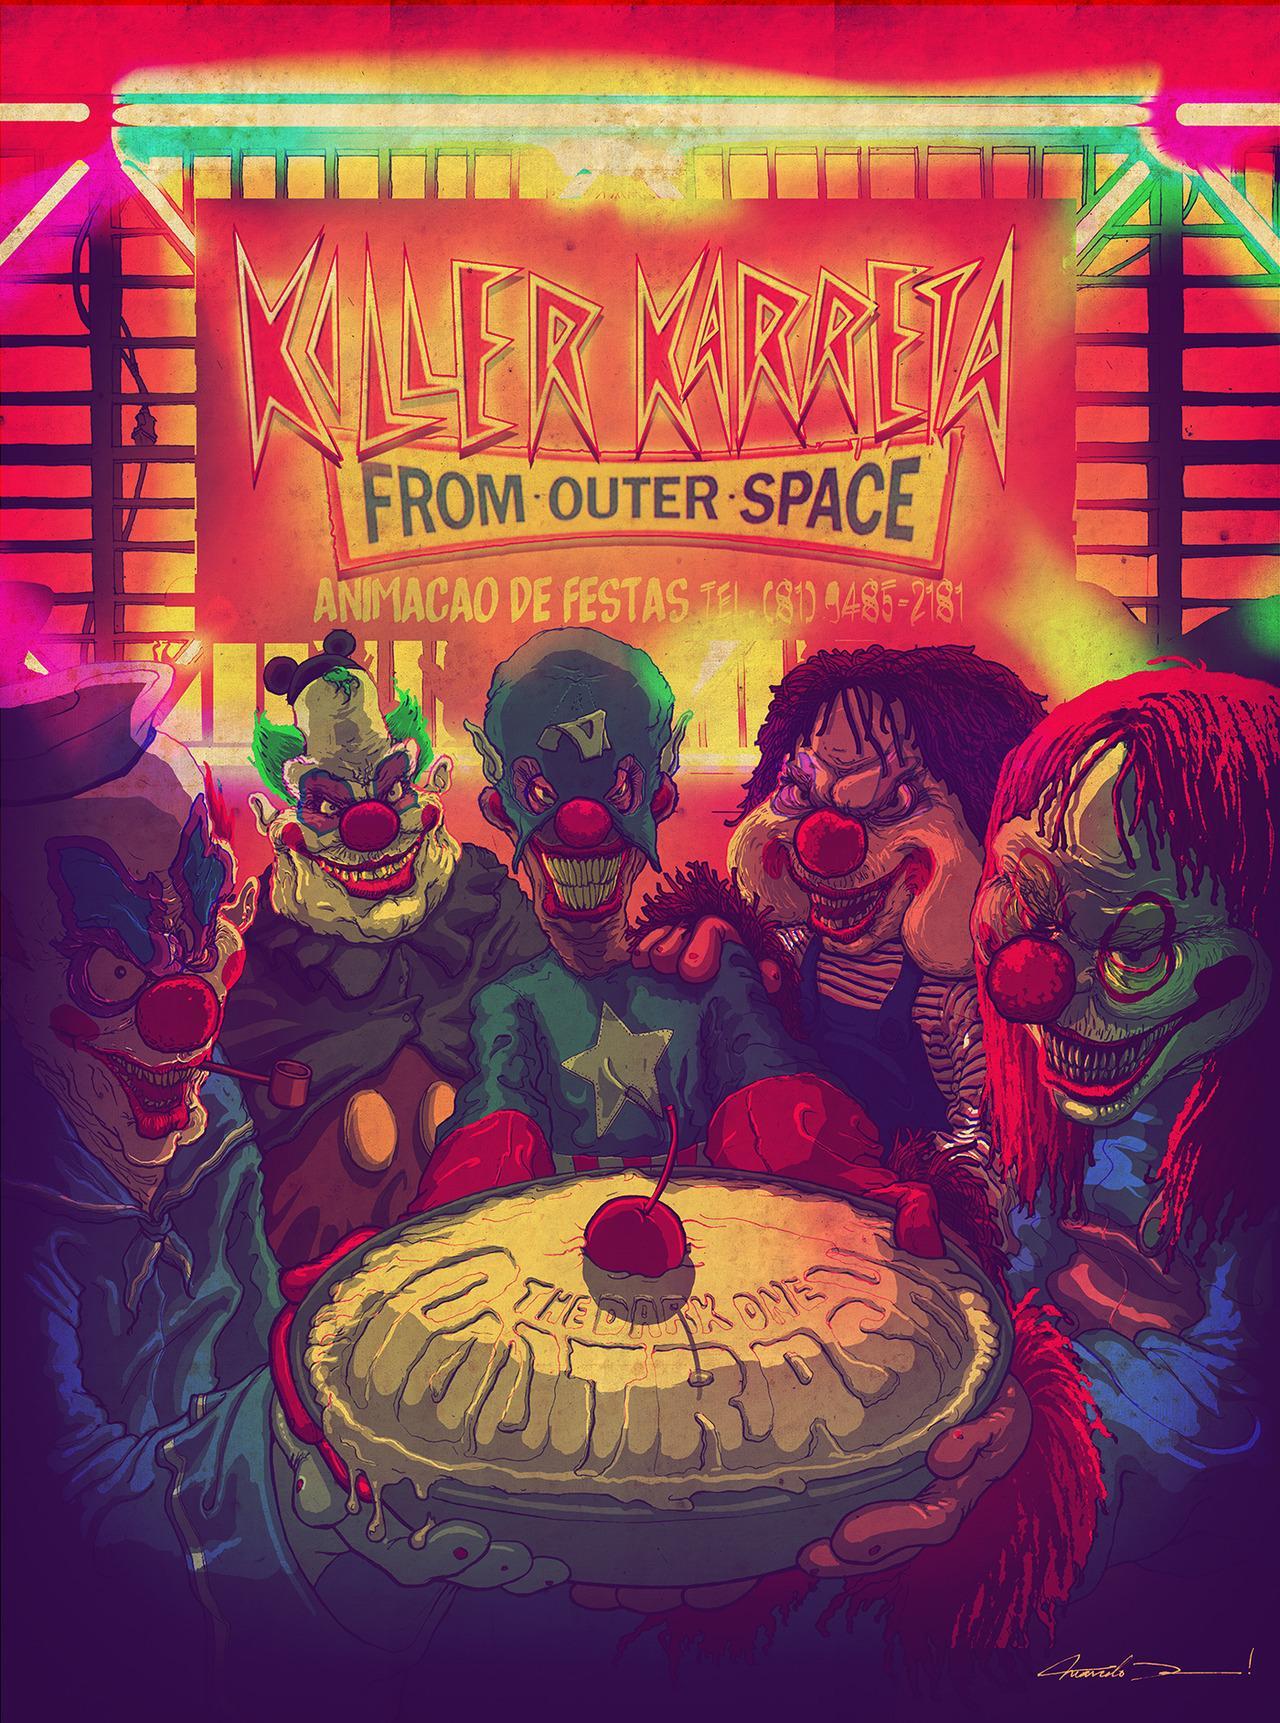 Killer Klowns From Outer Space Poster